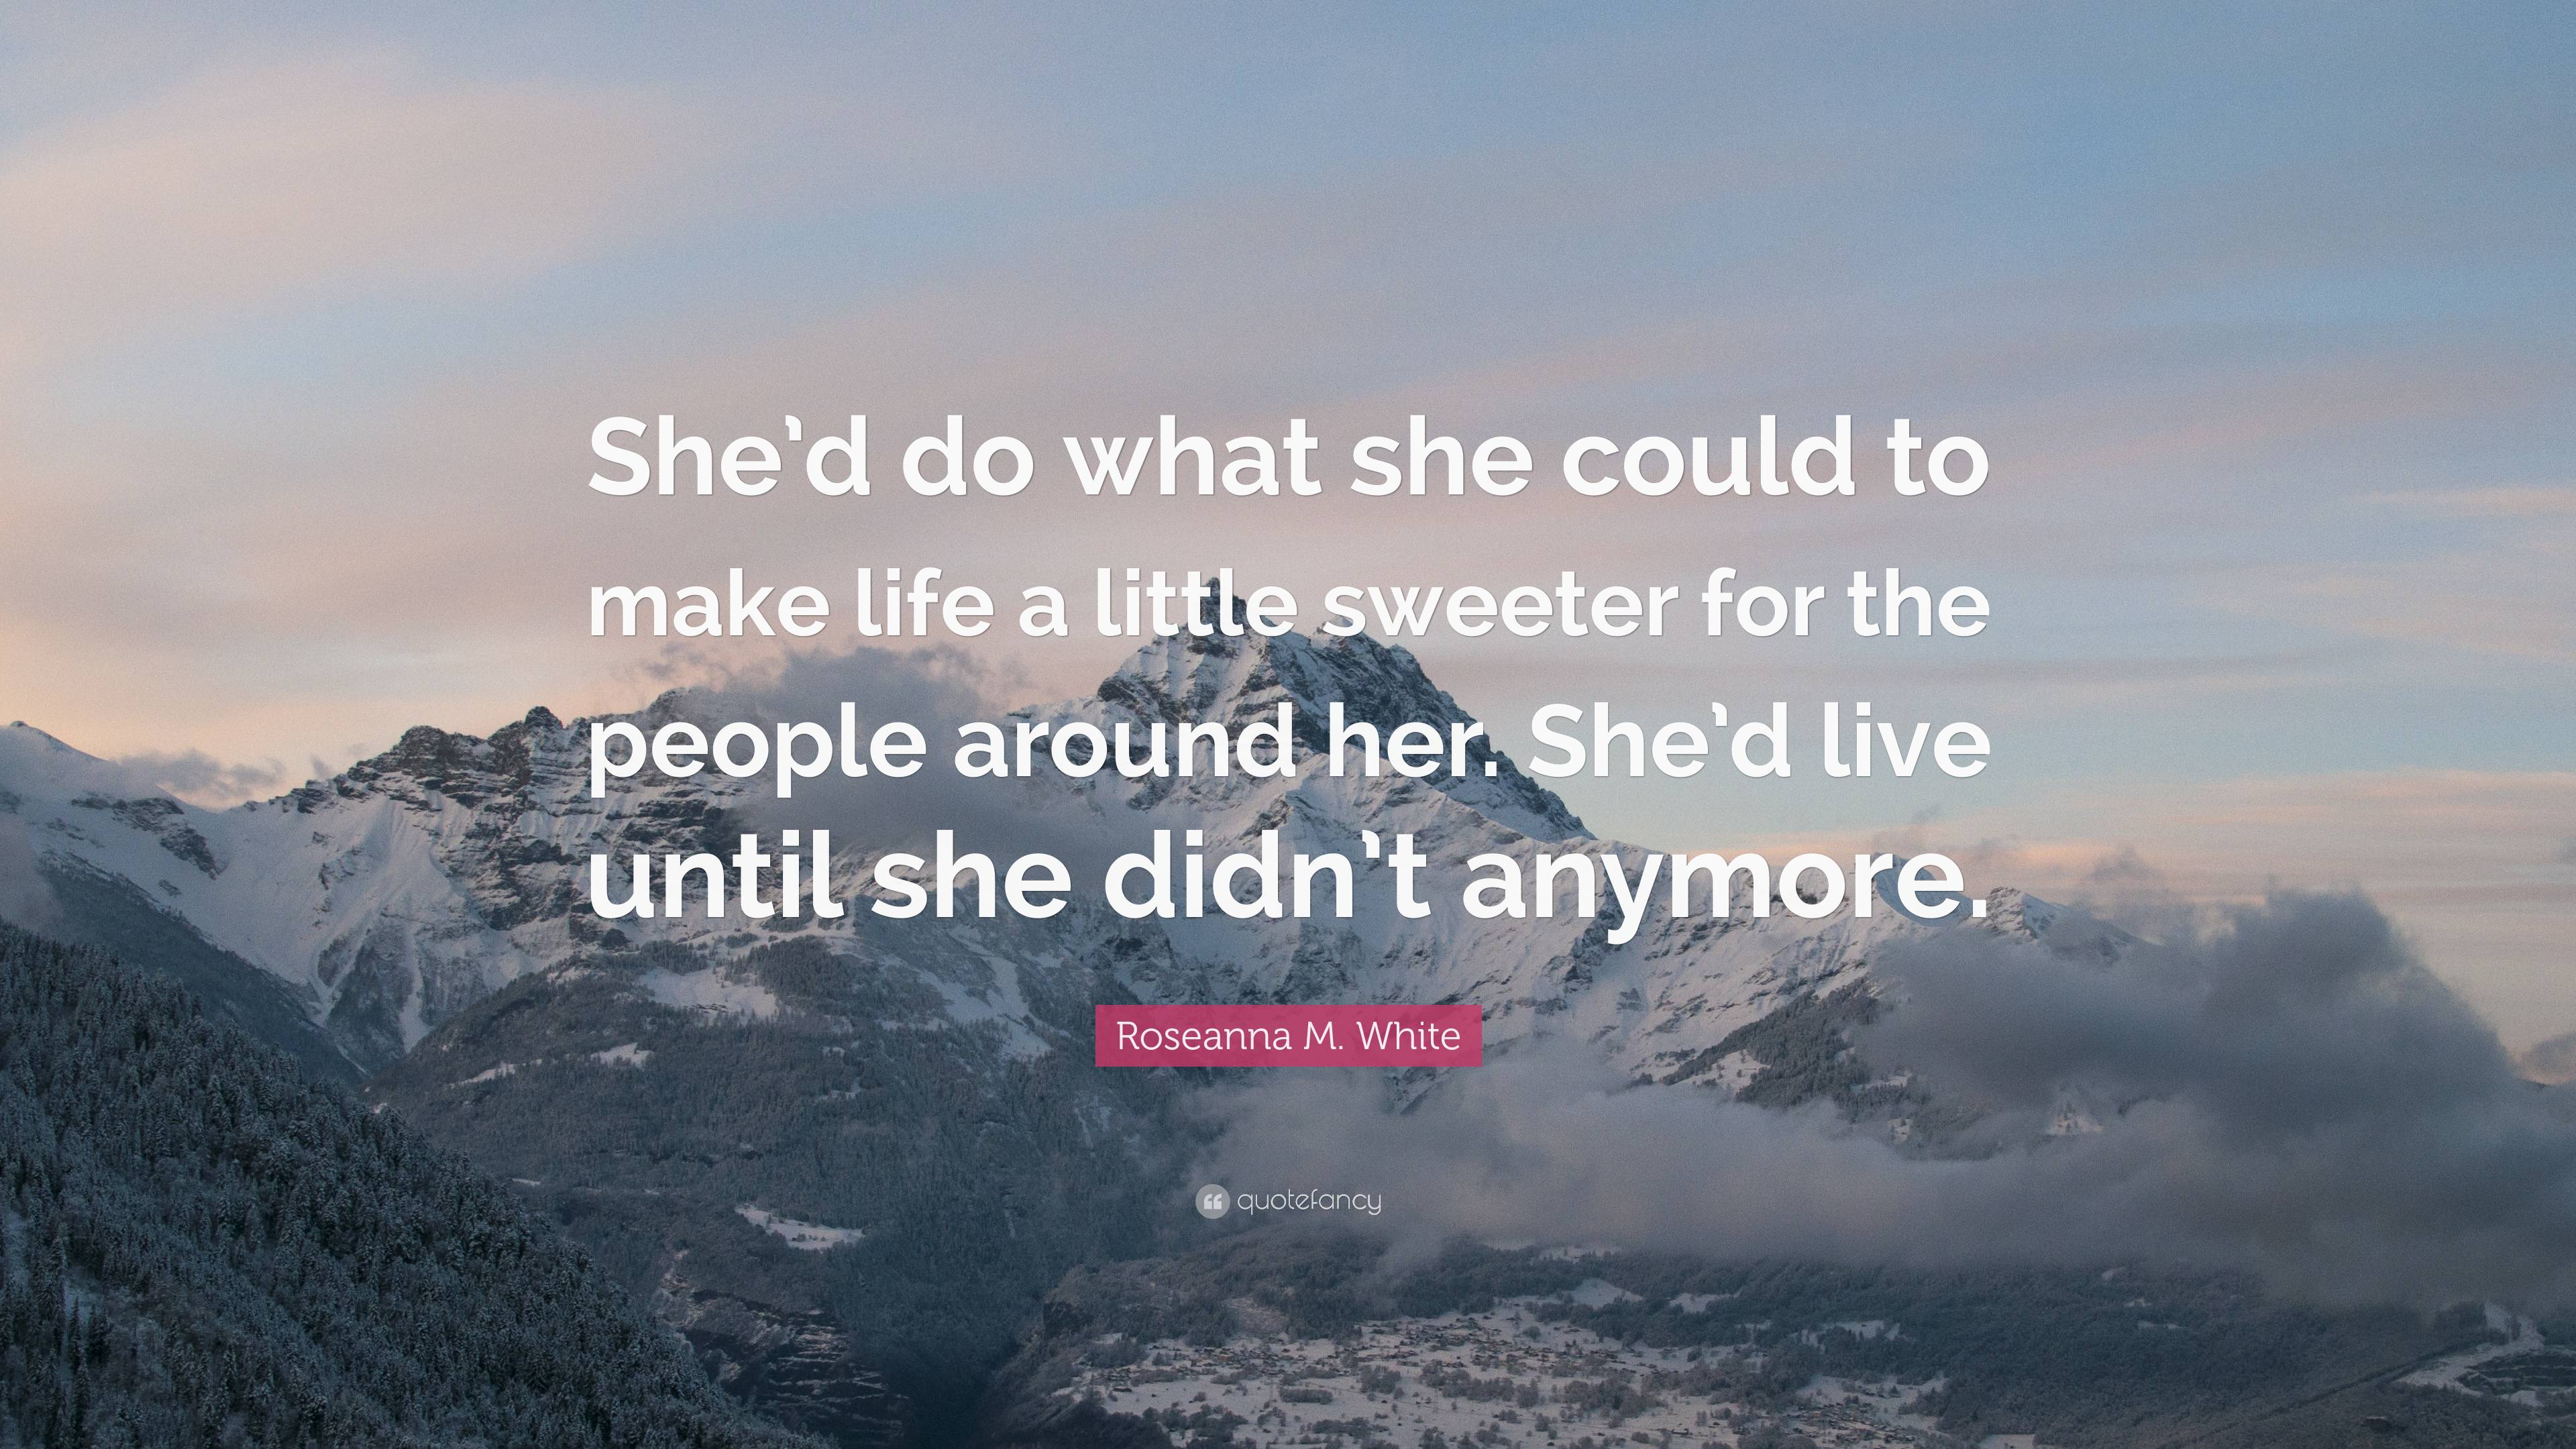 Roseanna M. White Quote: “She’d do what she could to make life a little ...